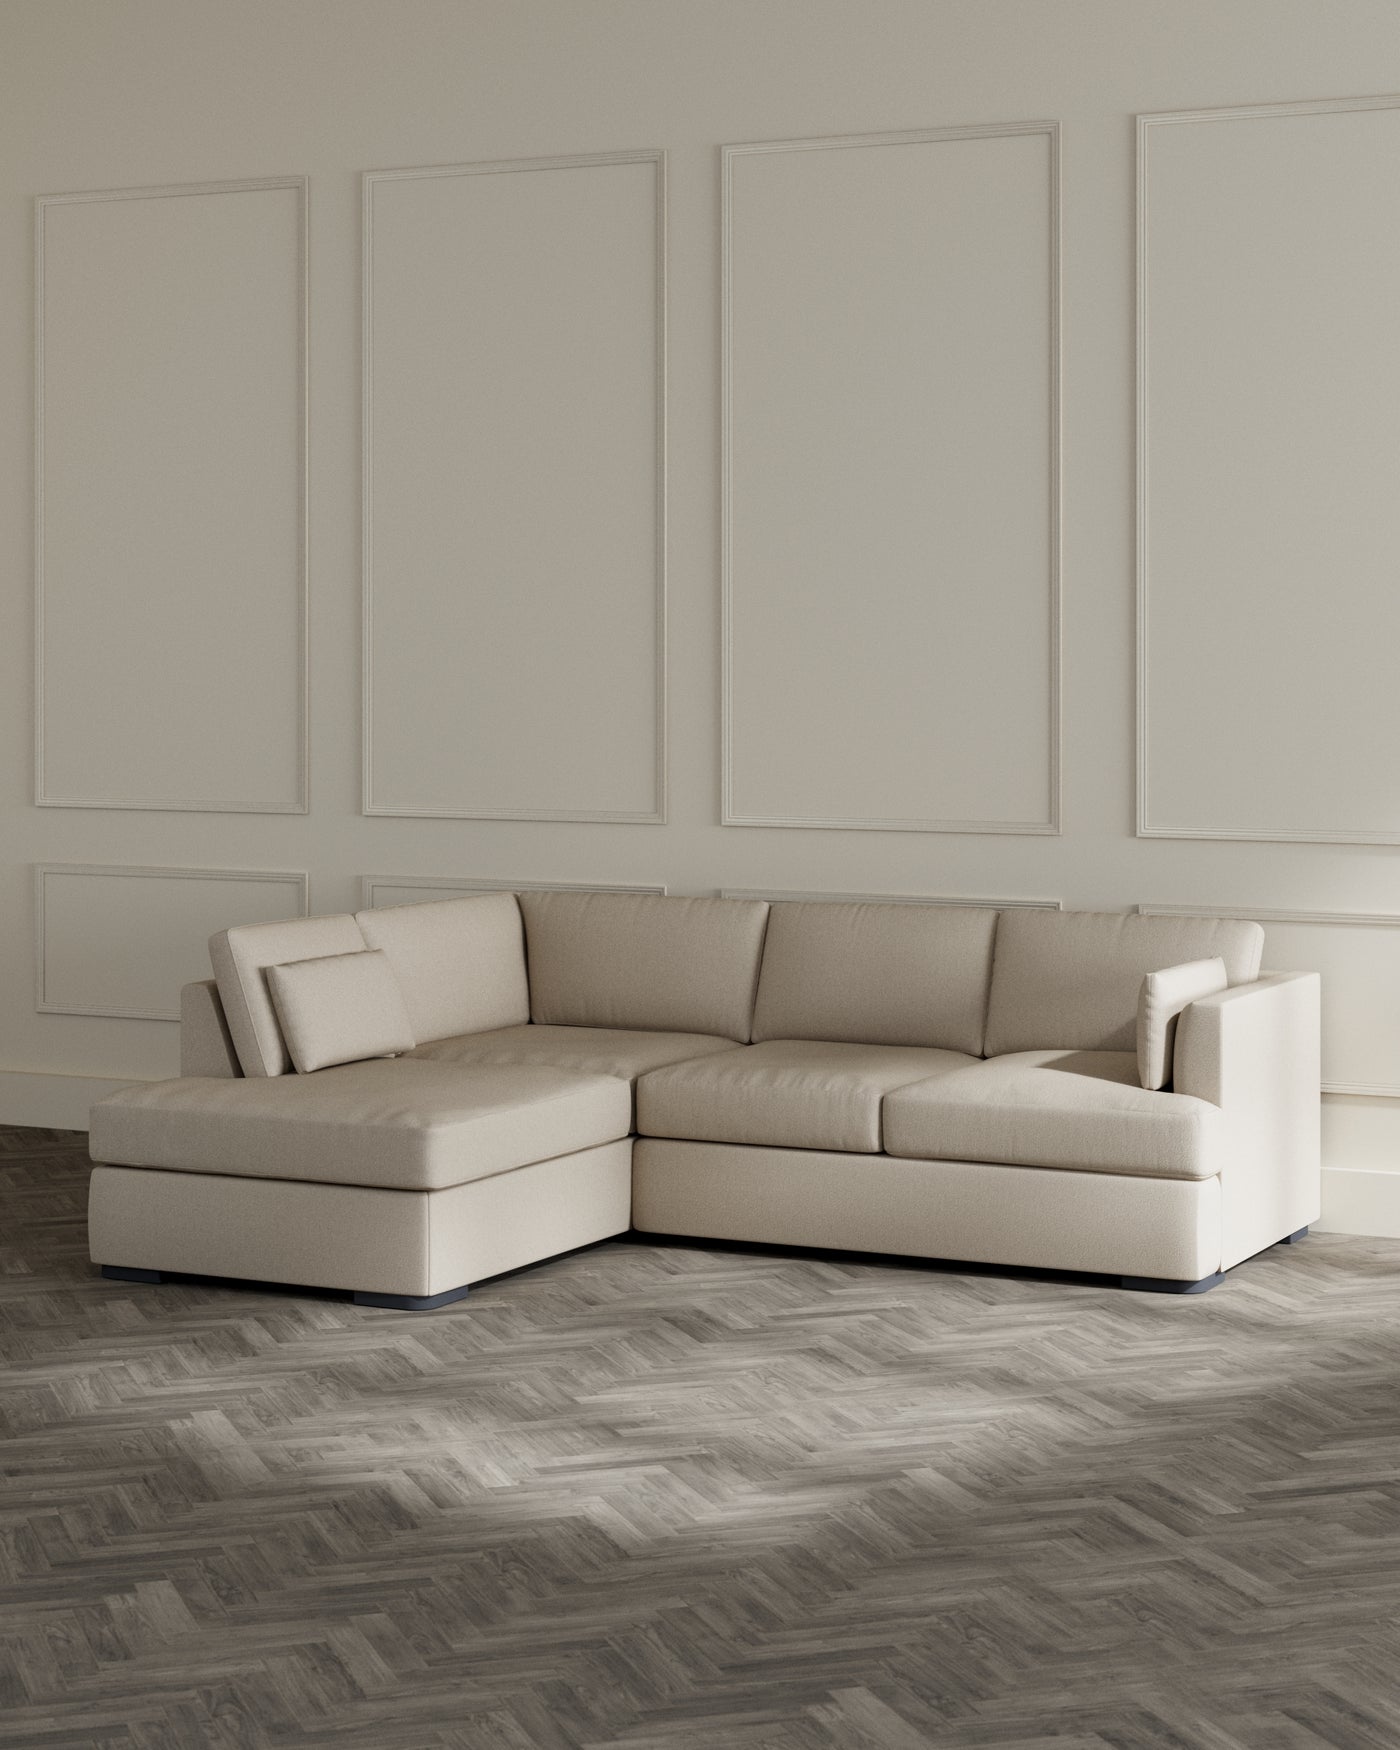 Modern beige L-shaped sectional sofa with chaise lounge and minimalist square armrests on a herringbone-patterned wooden floor, against a wall with elegant wainscoting.